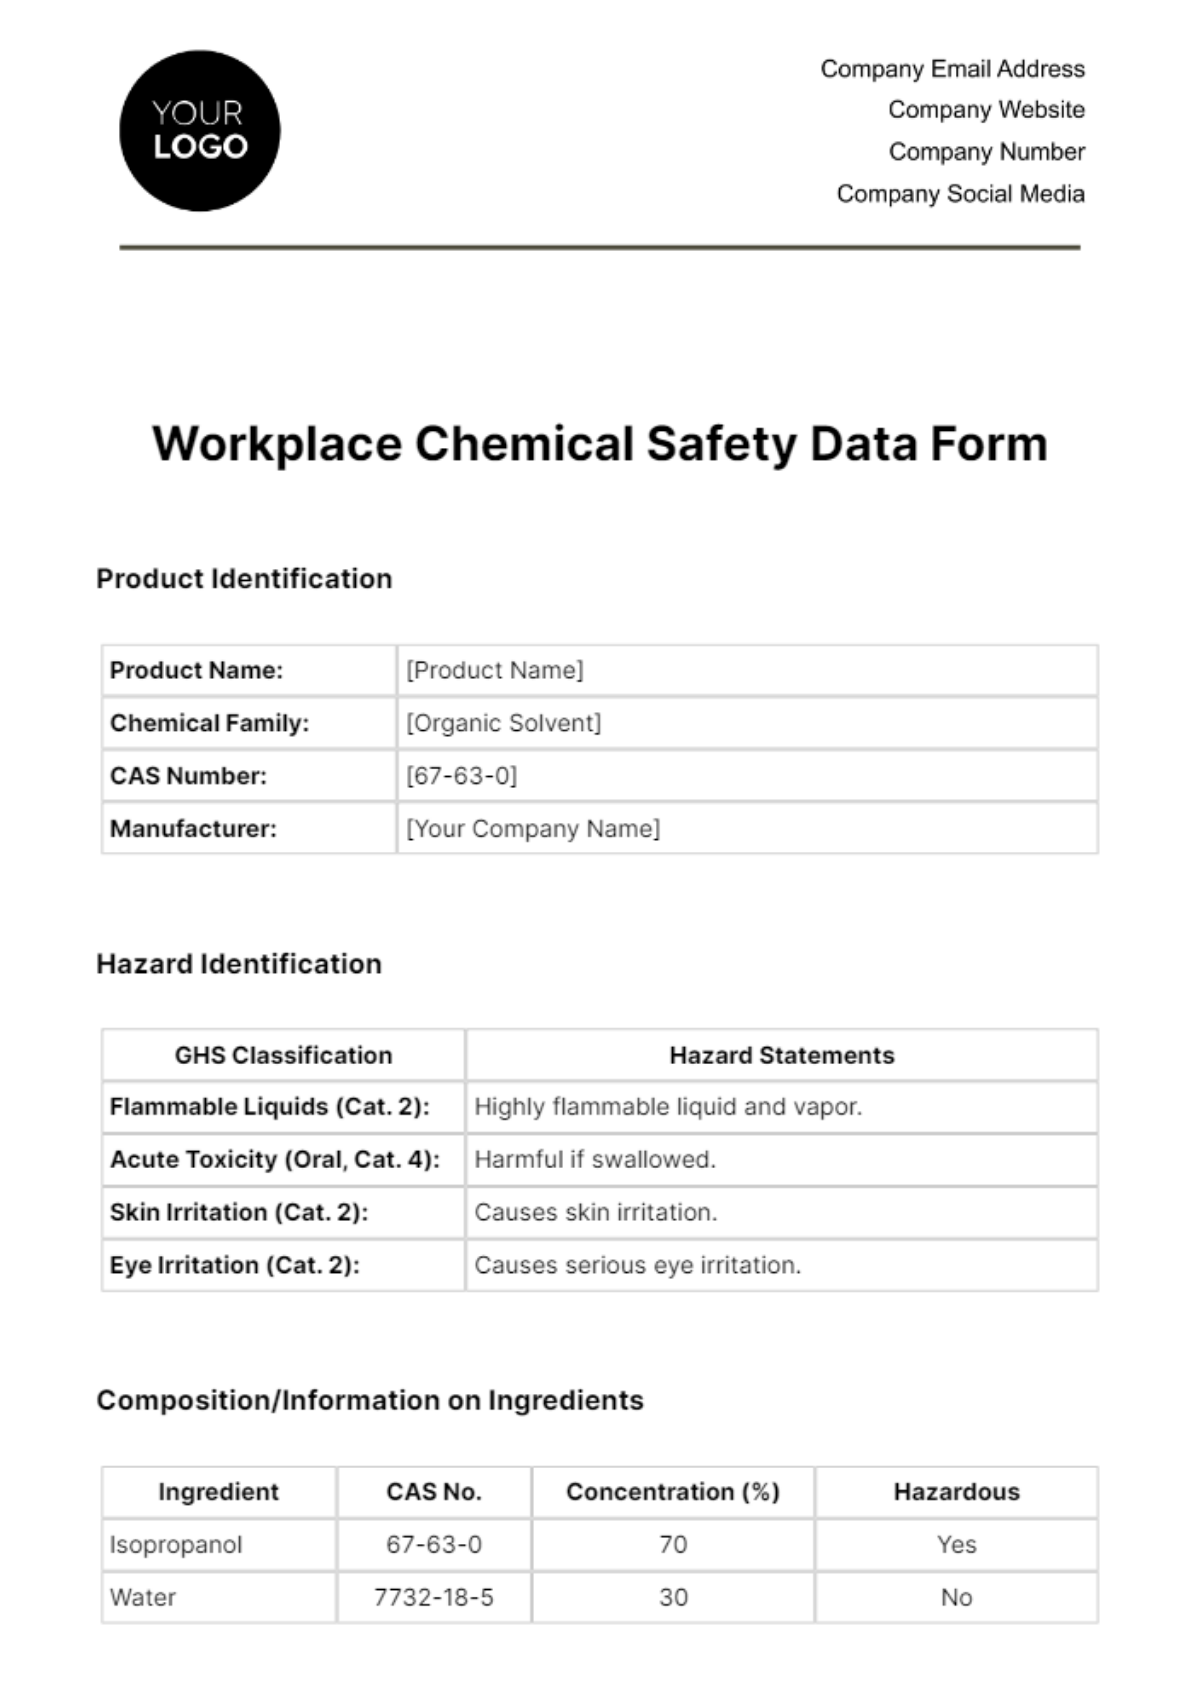 Workplace Chemical Safety Data Form Template